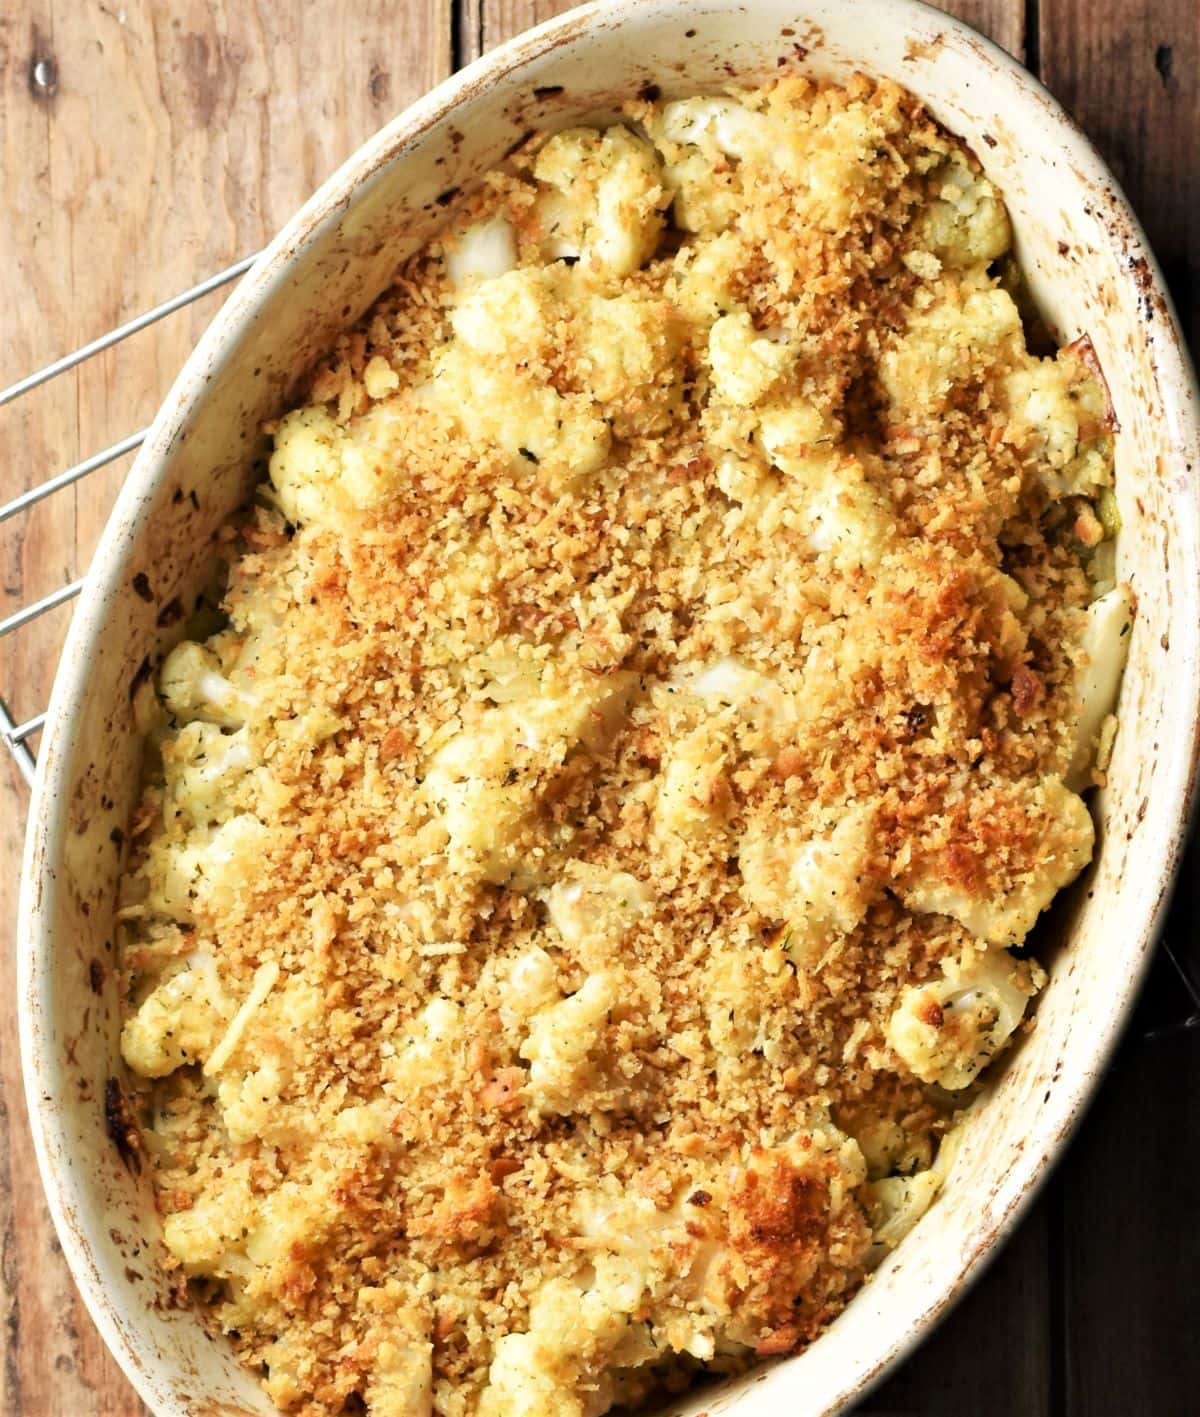 Baked cauliflower stuffing with golden breadcrumb topping in white oval dish.